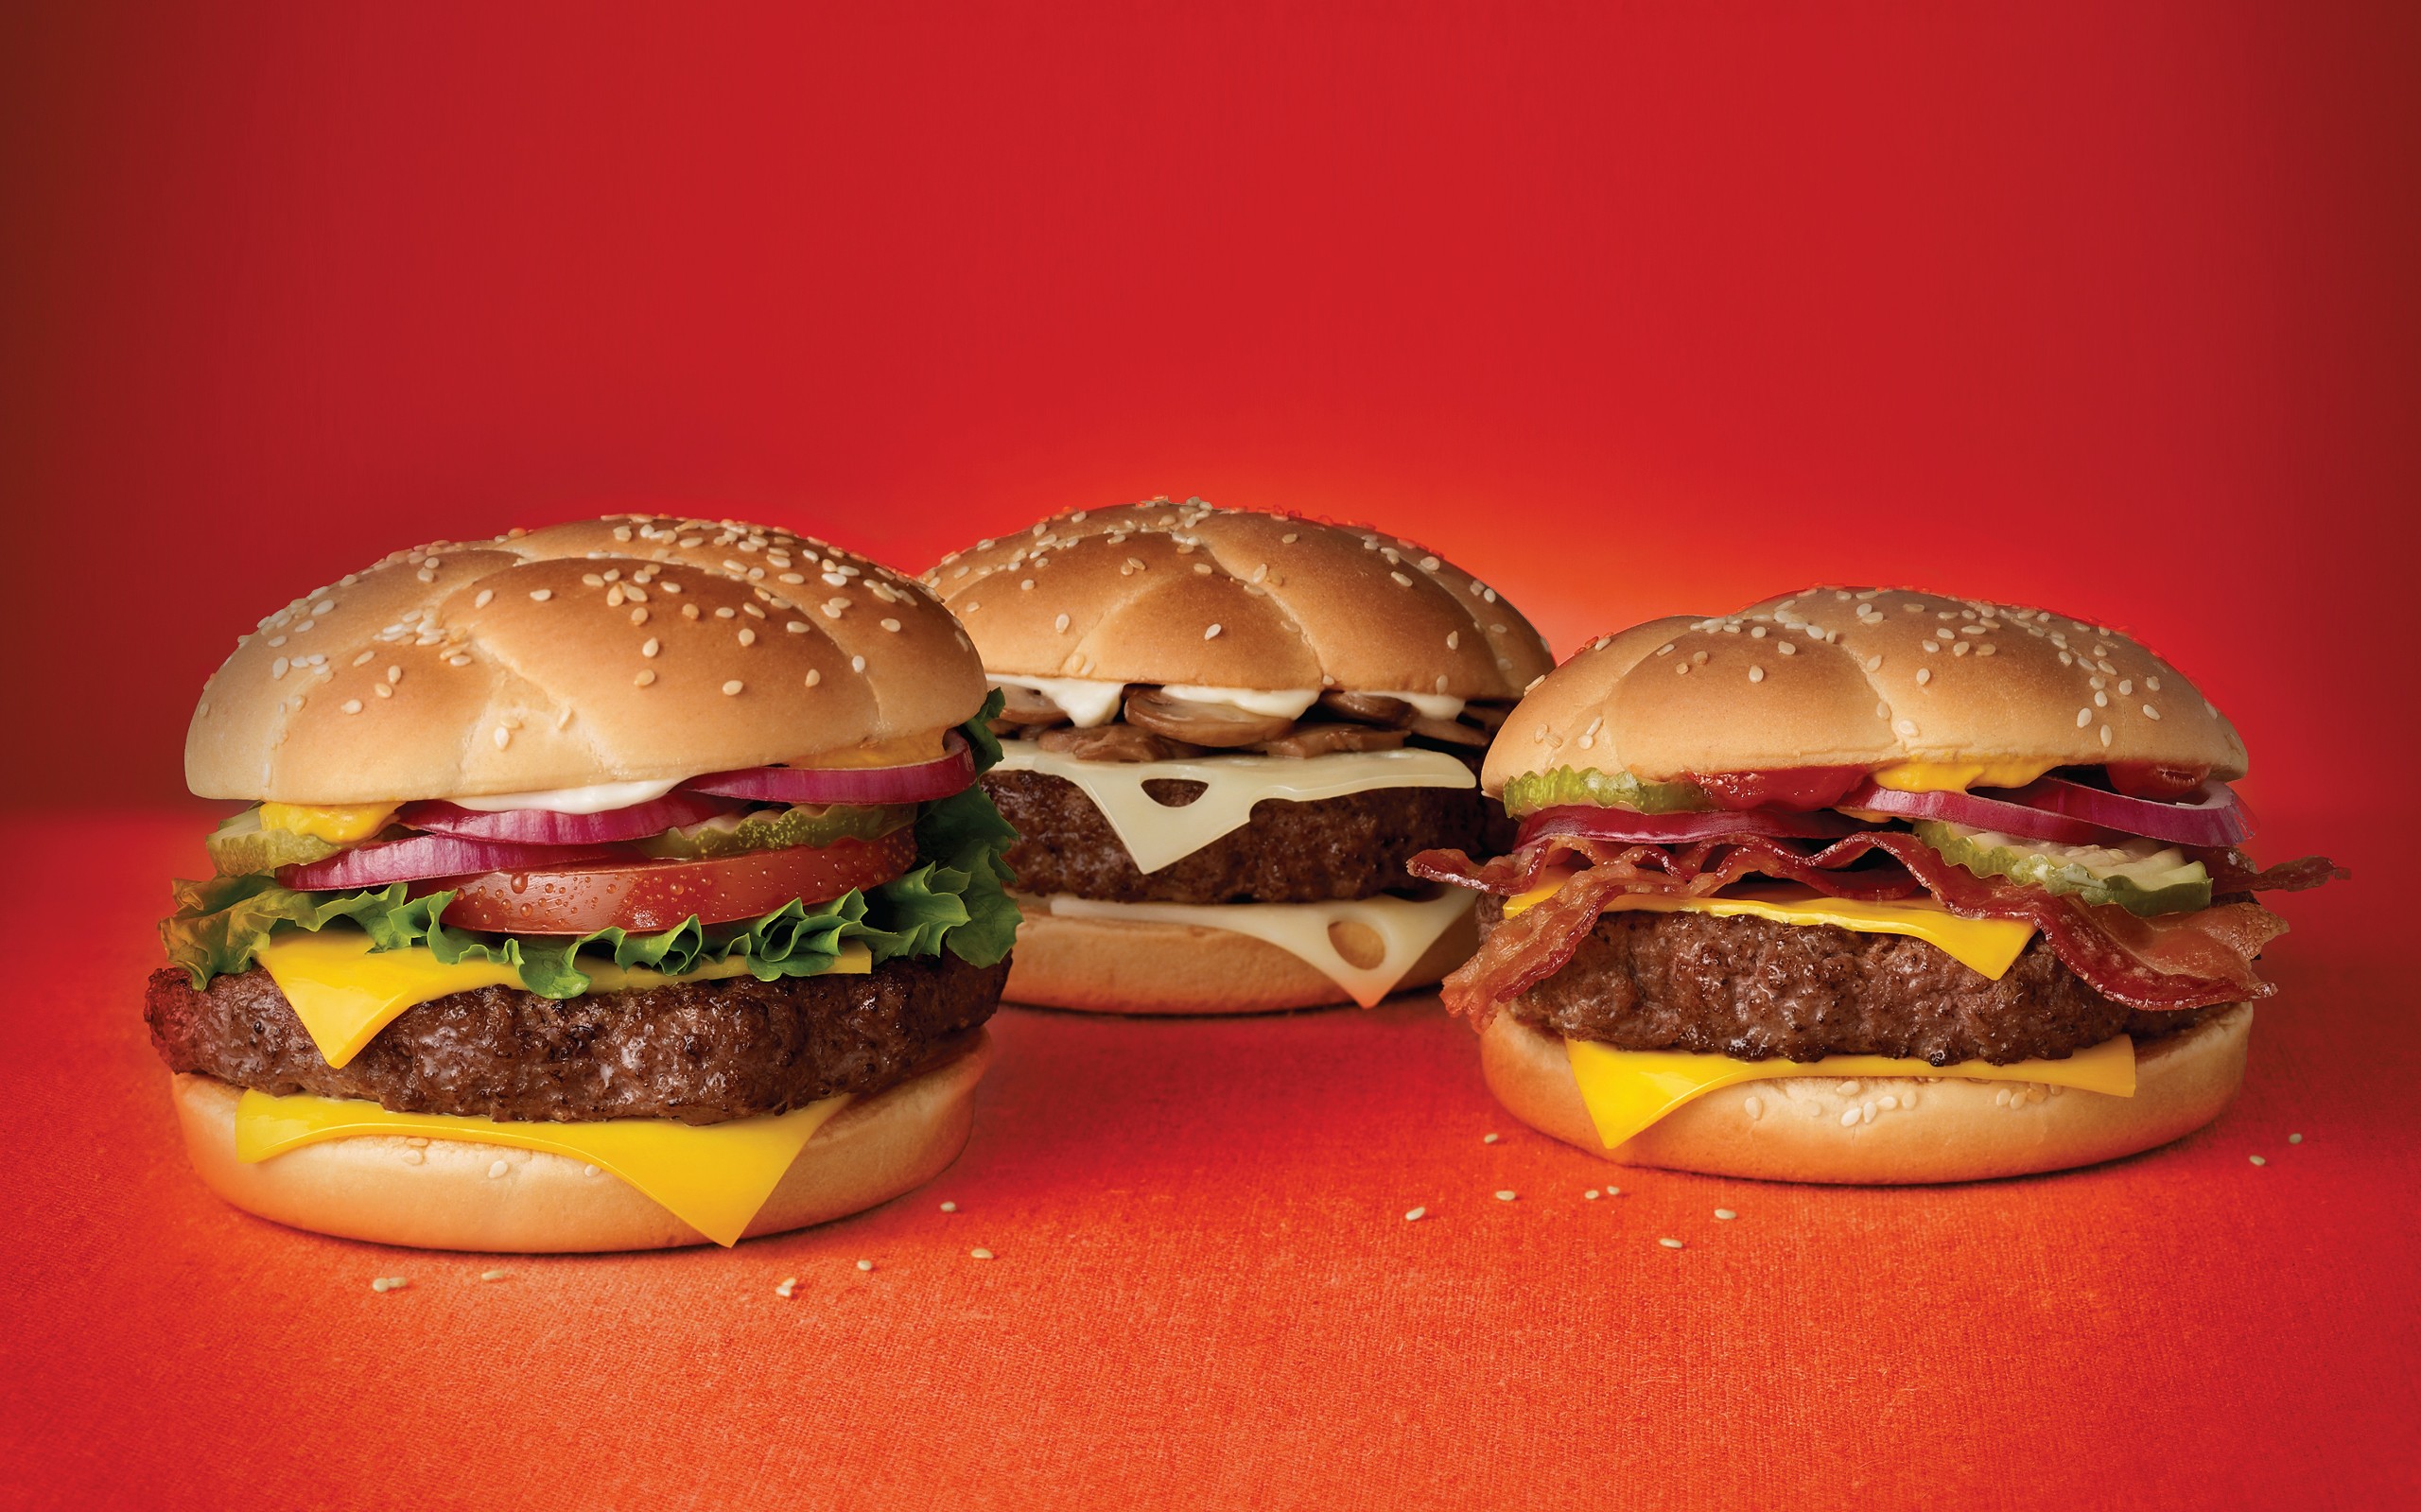 General 2560x1599 food burgers red background meat